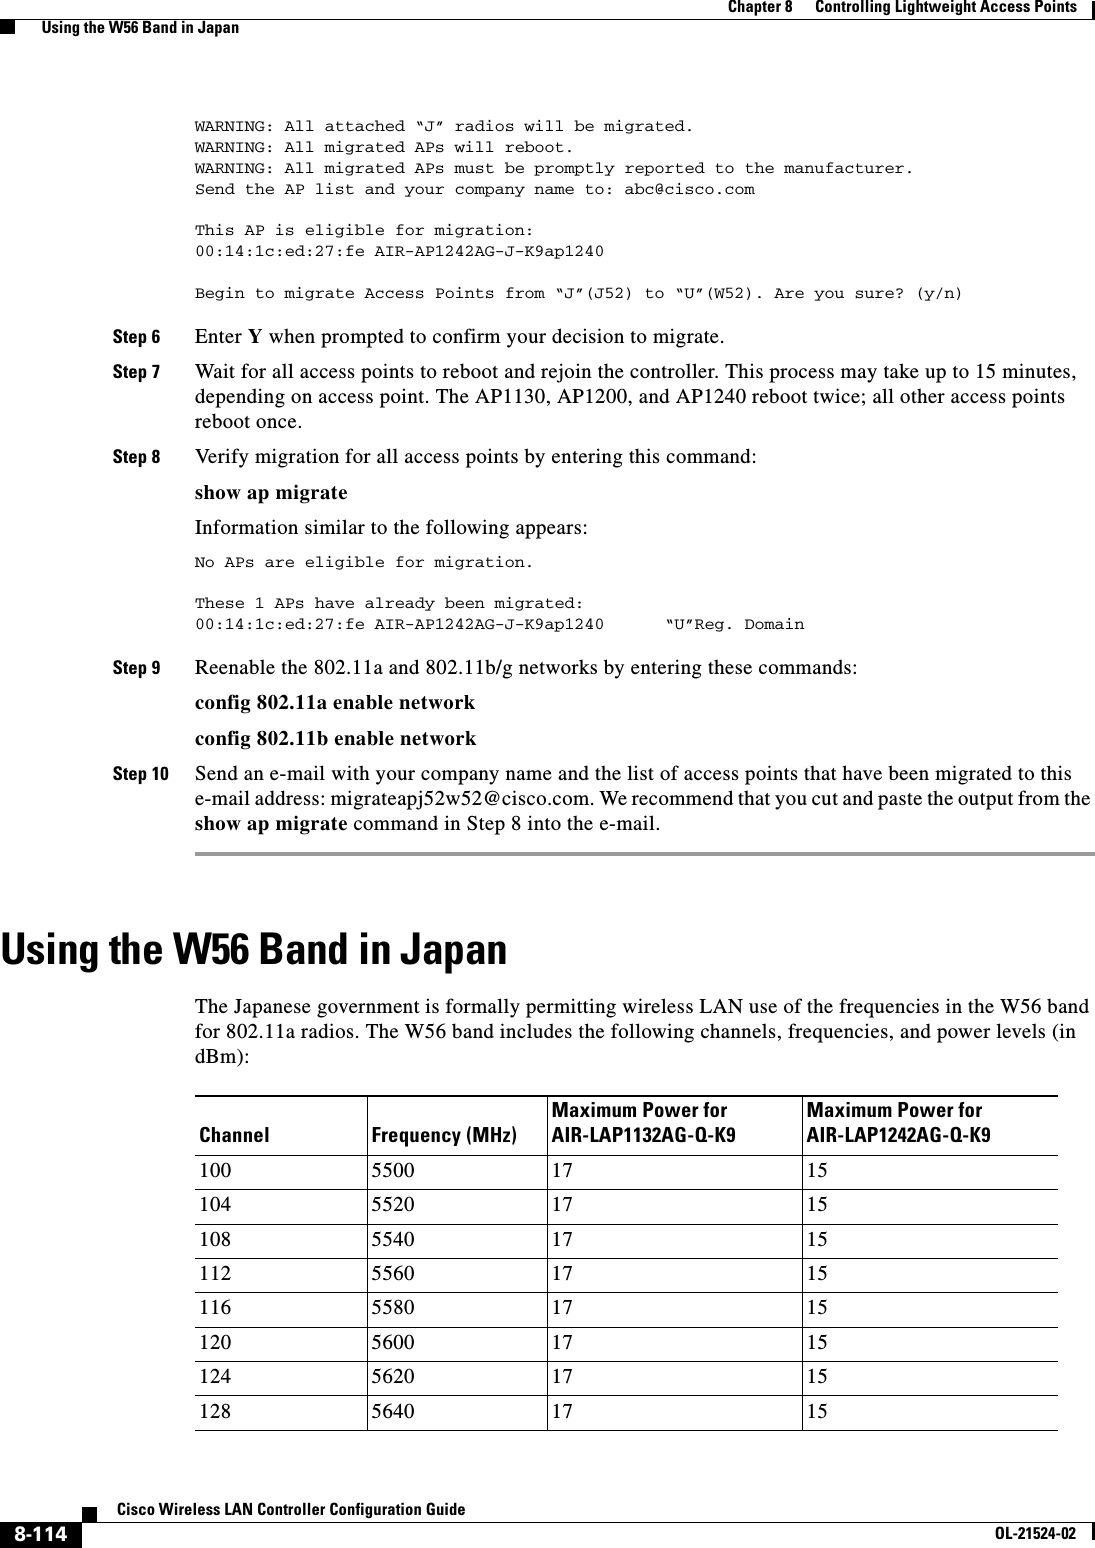  8-114Cisco Wireless LAN Controller Configuration GuideOL-21524-02Chapter 8      Controlling Lightweight Access Points  Using the W56 Band in JapanWARNING: All attached “J” radios will be migrated.WARNING: All migrated APs will reboot.WARNING: All migrated APs must be promptly reported to the manufacturer.Send the AP list and your company name to: abc@cisco.comThis AP is eligible for migration:00:14:1c:ed:27:fe AIR-AP1242AG-J-K9ap1240Begin to migrate Access Points from “J”(J52) to “U”(W52). Are you sure? (y/n) Step 6 Enter Y when prompted to confirm your decision to migrate.Step 7 Wait for all access points to reboot and rejoin the controller. This process may take up to 15 minutes, depending on access point. The AP1130, AP1200, and AP1240 reboot twice; all other access points reboot once.Step 8 Verify migration for all access points by entering this command:show ap migrateInformation similar to the following appears:No APs are eligible for migration.These 1 APs have already been migrated:00:14:1c:ed:27:fe AIR-AP1242AG-J-K9ap1240      “U”Reg. Domain    Step 9 Reenable the 802.11a and 802.11b/g networks by entering these commands:config 802.11a enable networkconfig 802.11b enable networkStep 10 Send an e-mail with your company name and the list of access points that have been migrated to this e-mail address: migrateapj52w52@cisco.com. We recommend that you cut and paste the output from the show ap migrate command in Step 8 into the e-mail.Using the W56 Band in JapanThe Japanese government is formally permitting wireless LAN use of the frequencies in the W56 band for 802.11a radios. The W56 band includes the following channels, frequencies, and power levels (in dBm):Channel Frequency (MHz)Maximum Power for AIR-LAP1132AG-Q-K9Maximum Power for AIR-LAP1242AG-Q-K9100 5500 17 15104 5520 17 15108 5540 17 15112 5560 17 15116 5580 17 15120 5600 17 15124 5620 17 15128 5640 17 15